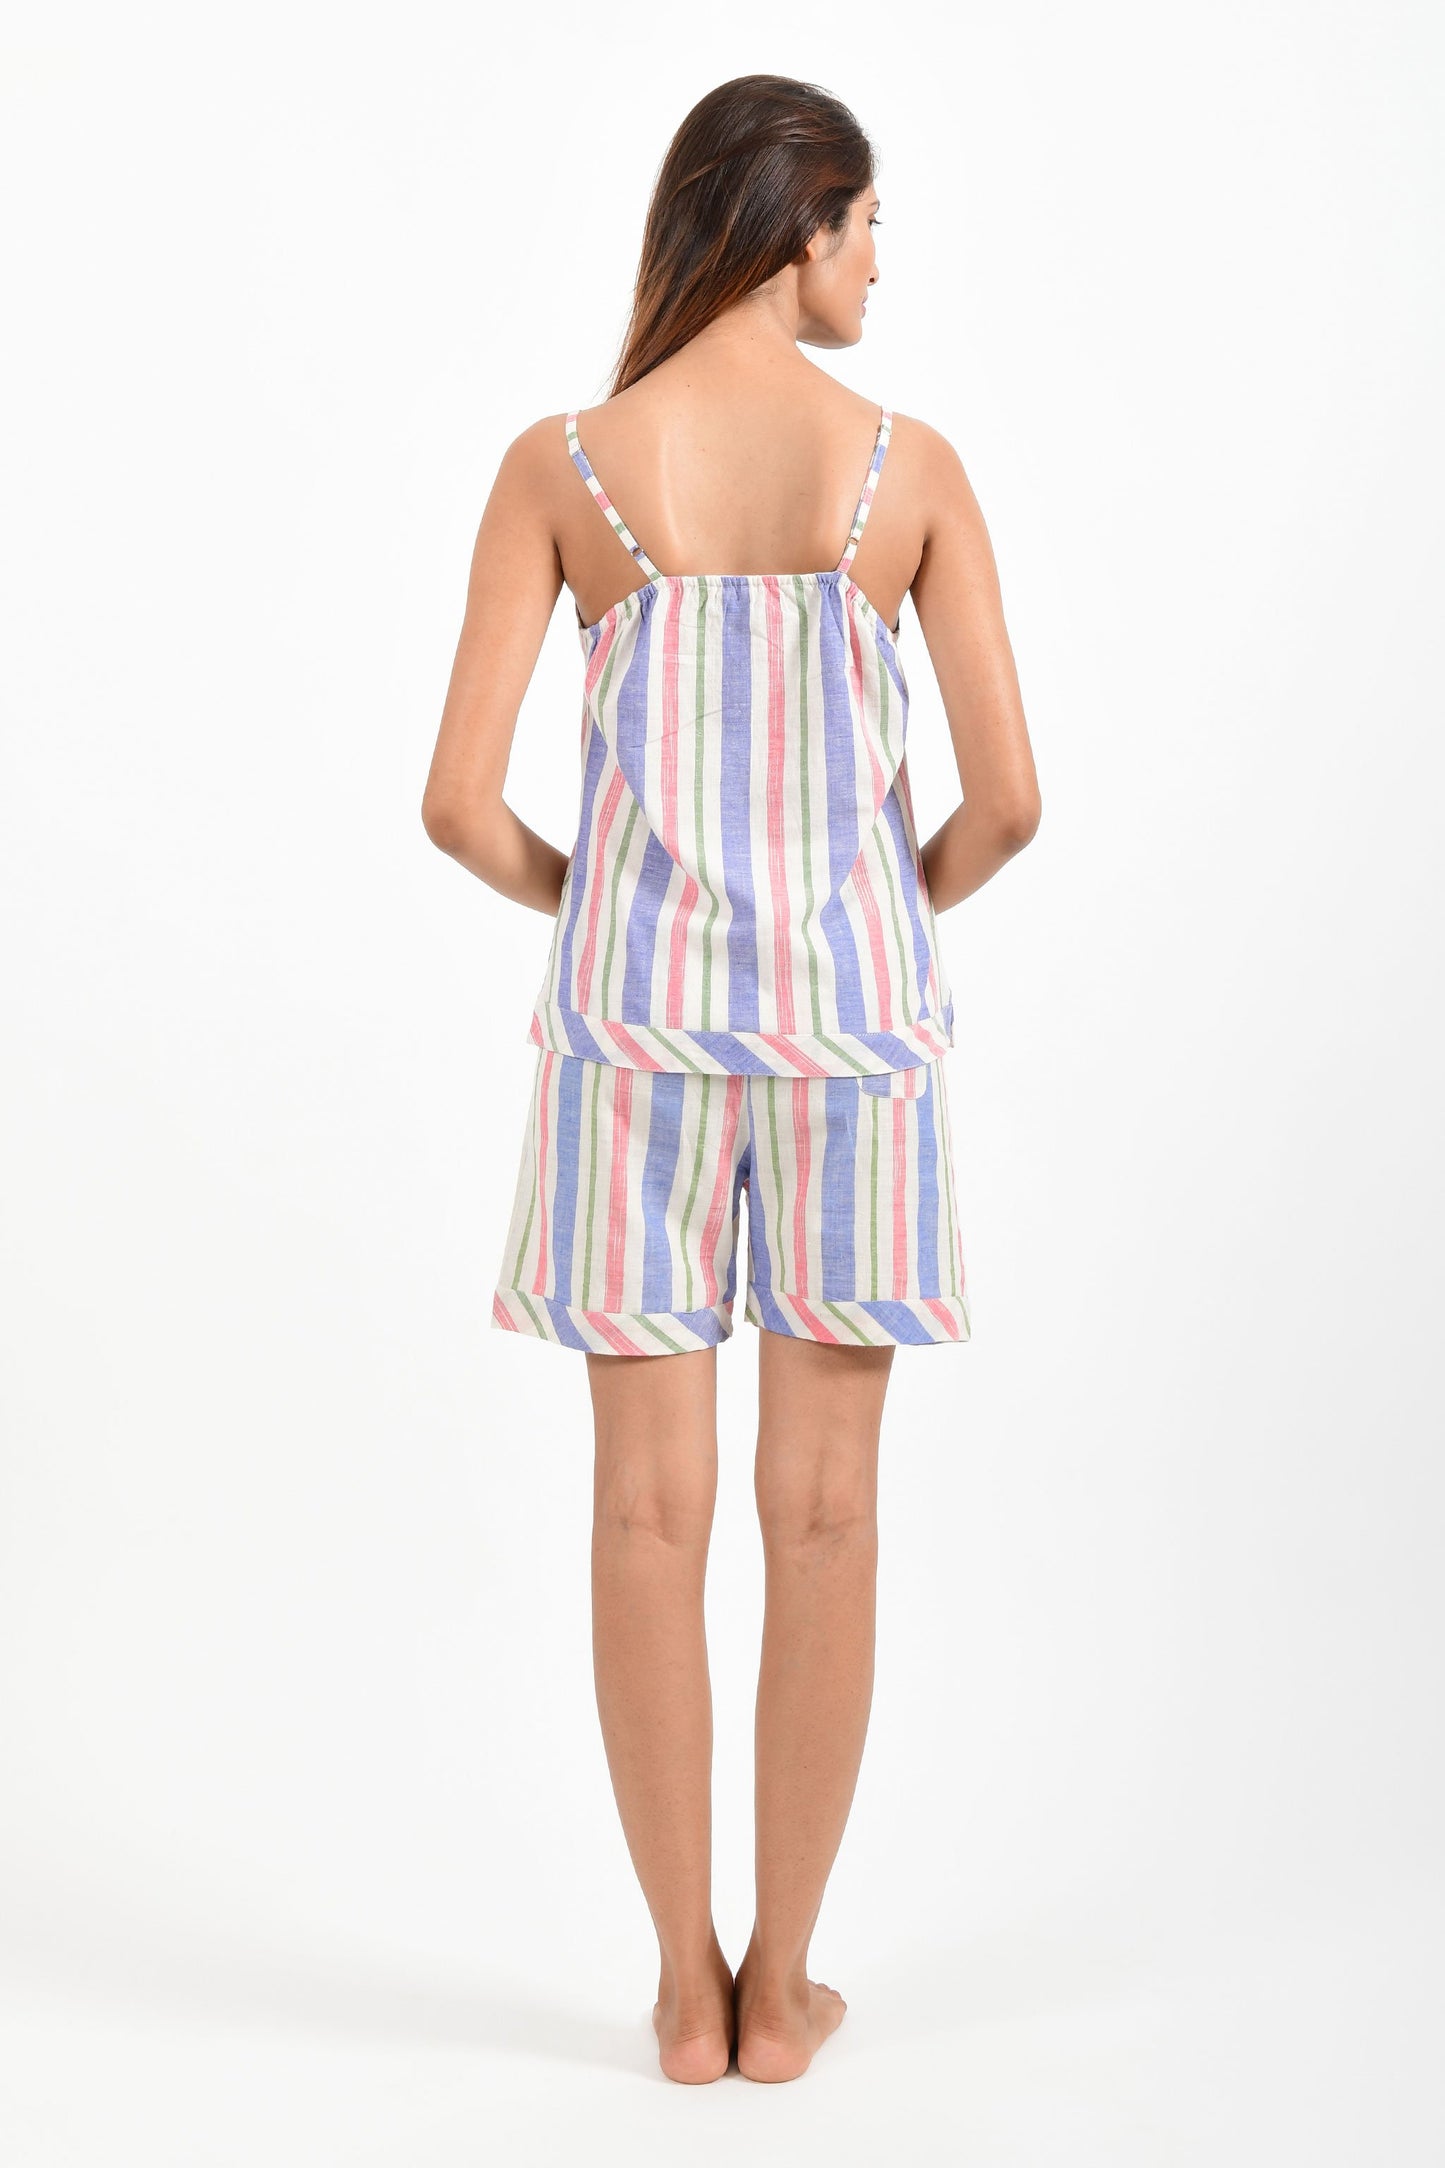 Back pose of an Indian female womenswear fashion model in azo-free candy colour striped, handspun and handwoven khadi cotton spaghetti top and boxers by Cotton Rack.